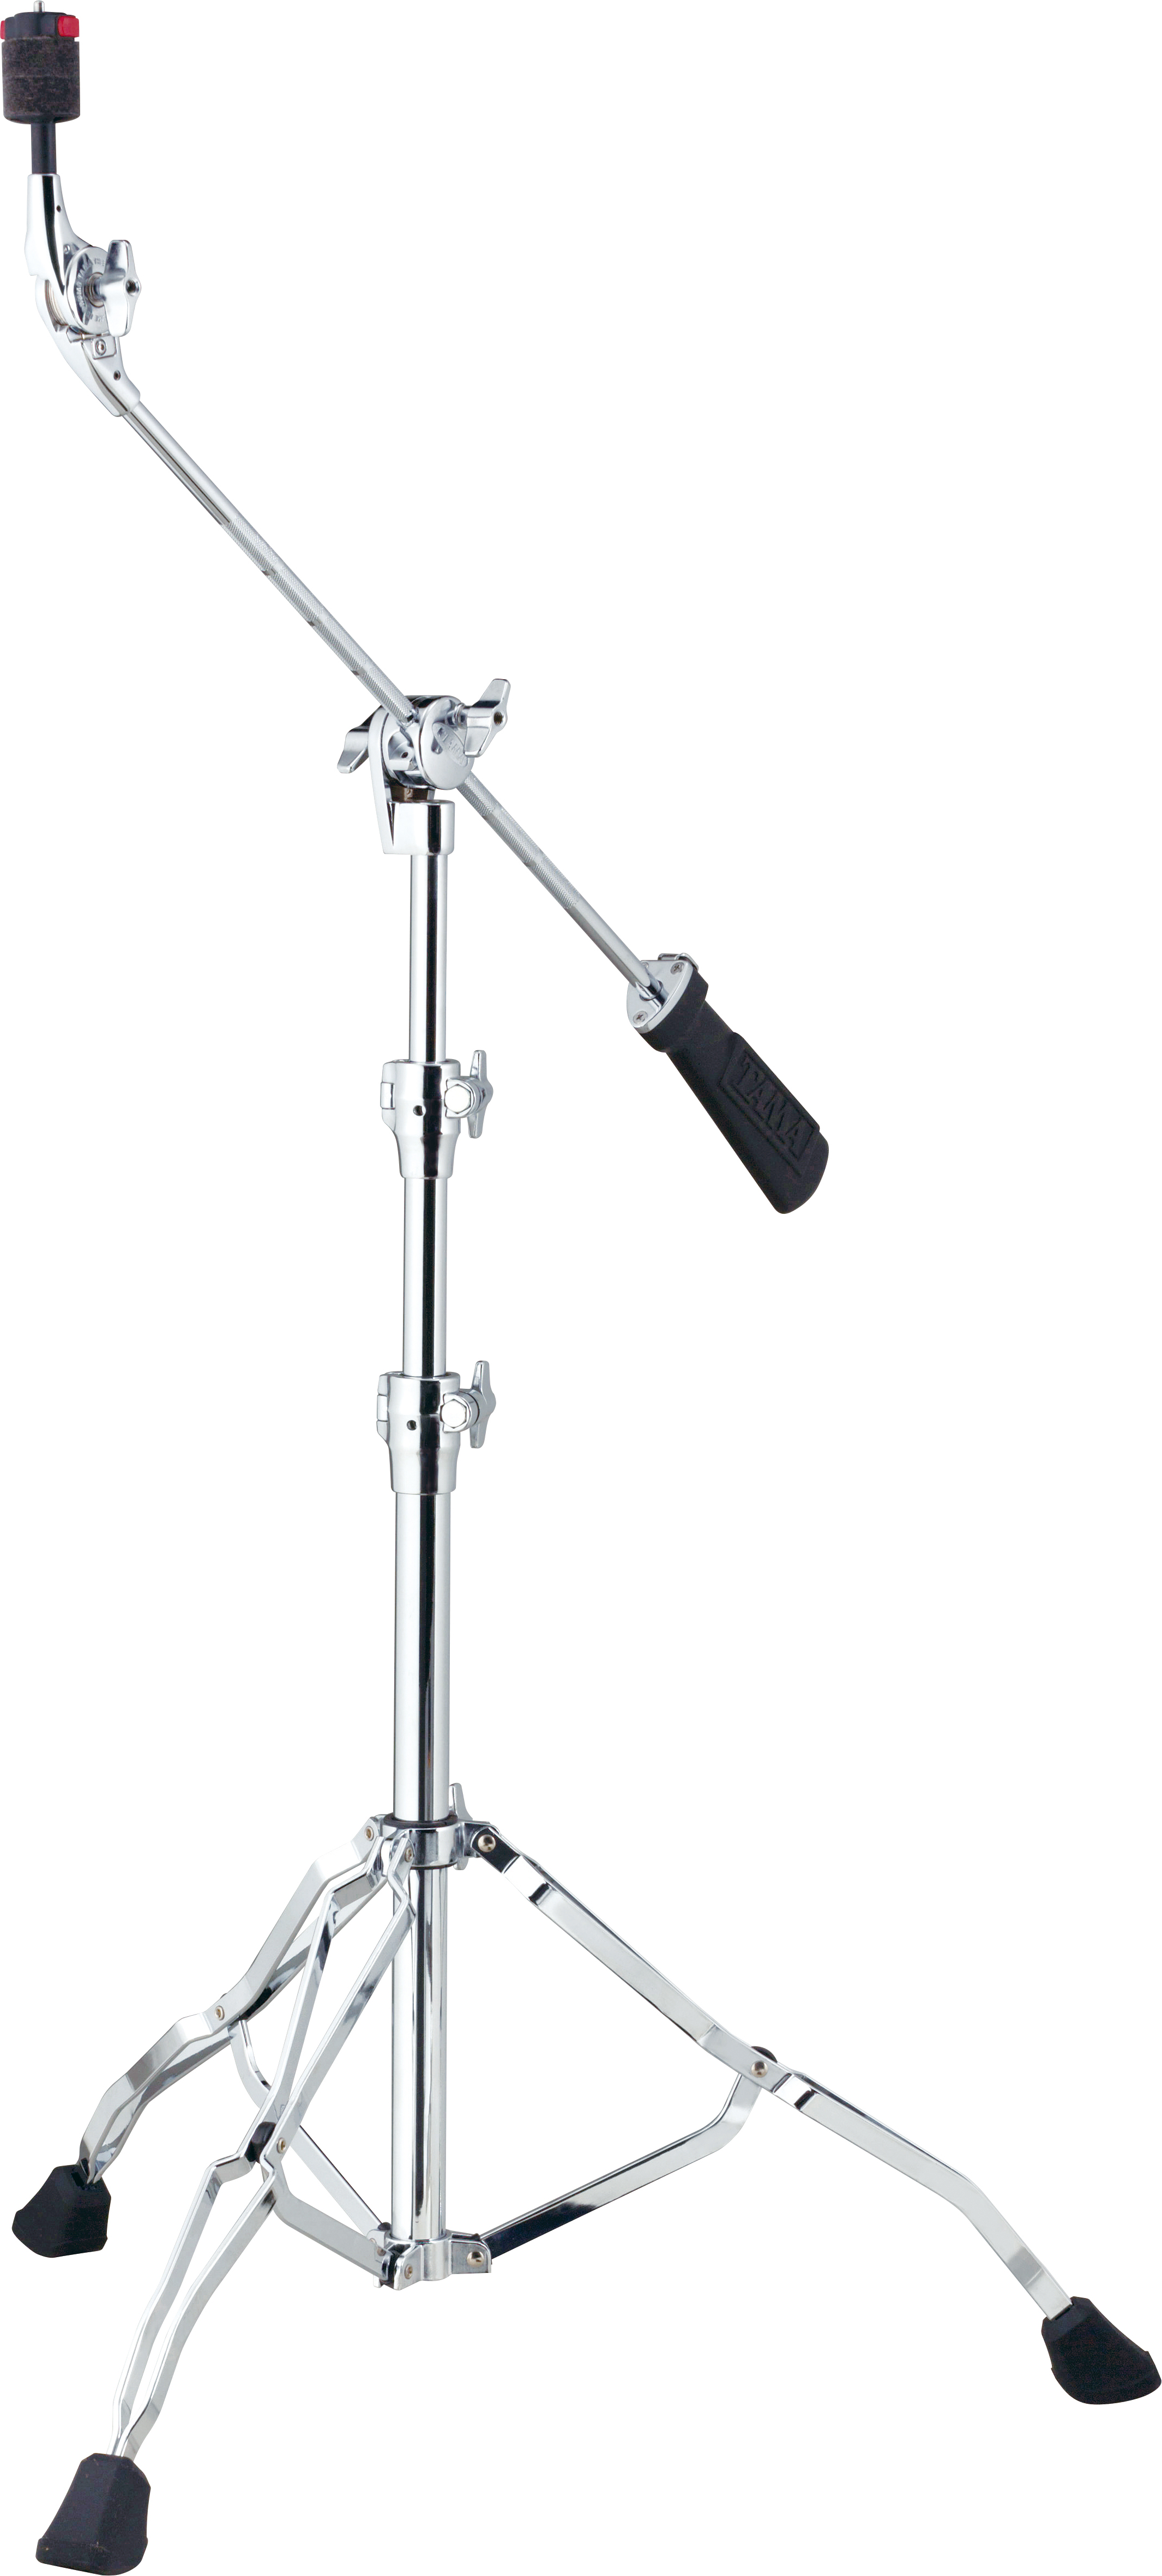 Tama Hc84bw Tam Boom Cymbal Stand W/weight - Cymbal stand - Main picture